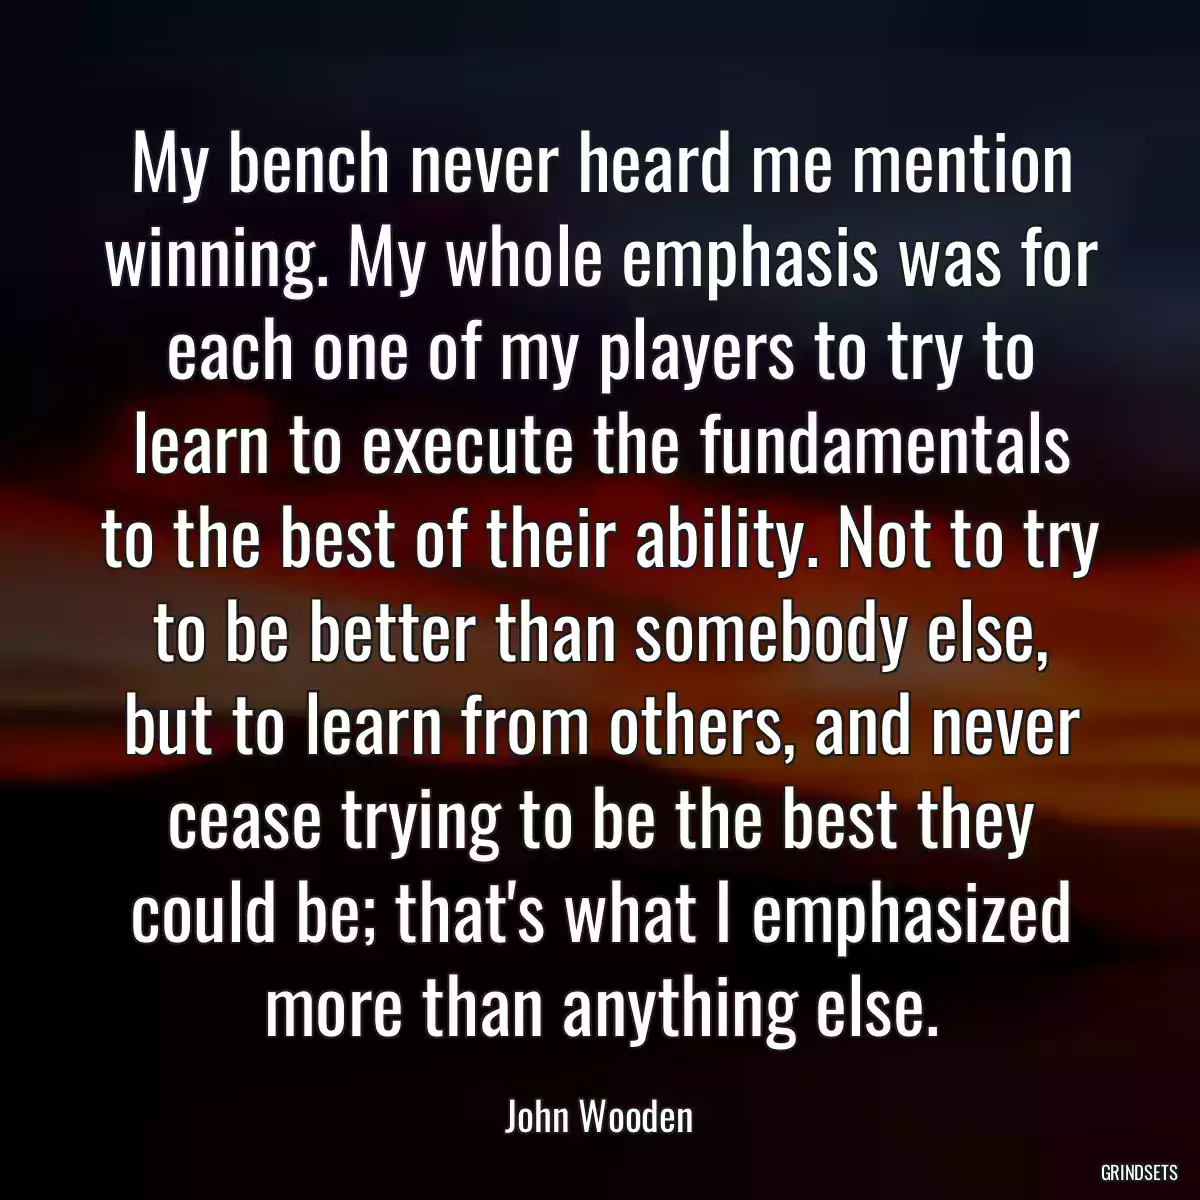 My bench never heard me mention winning. My whole emphasis was for each one of my players to try to learn to execute the fundamentals to the best of their ability. Not to try to be better than somebody else, but to learn from others, and never cease trying to be the best they could be; that\'s what I emphasized more than anything else.